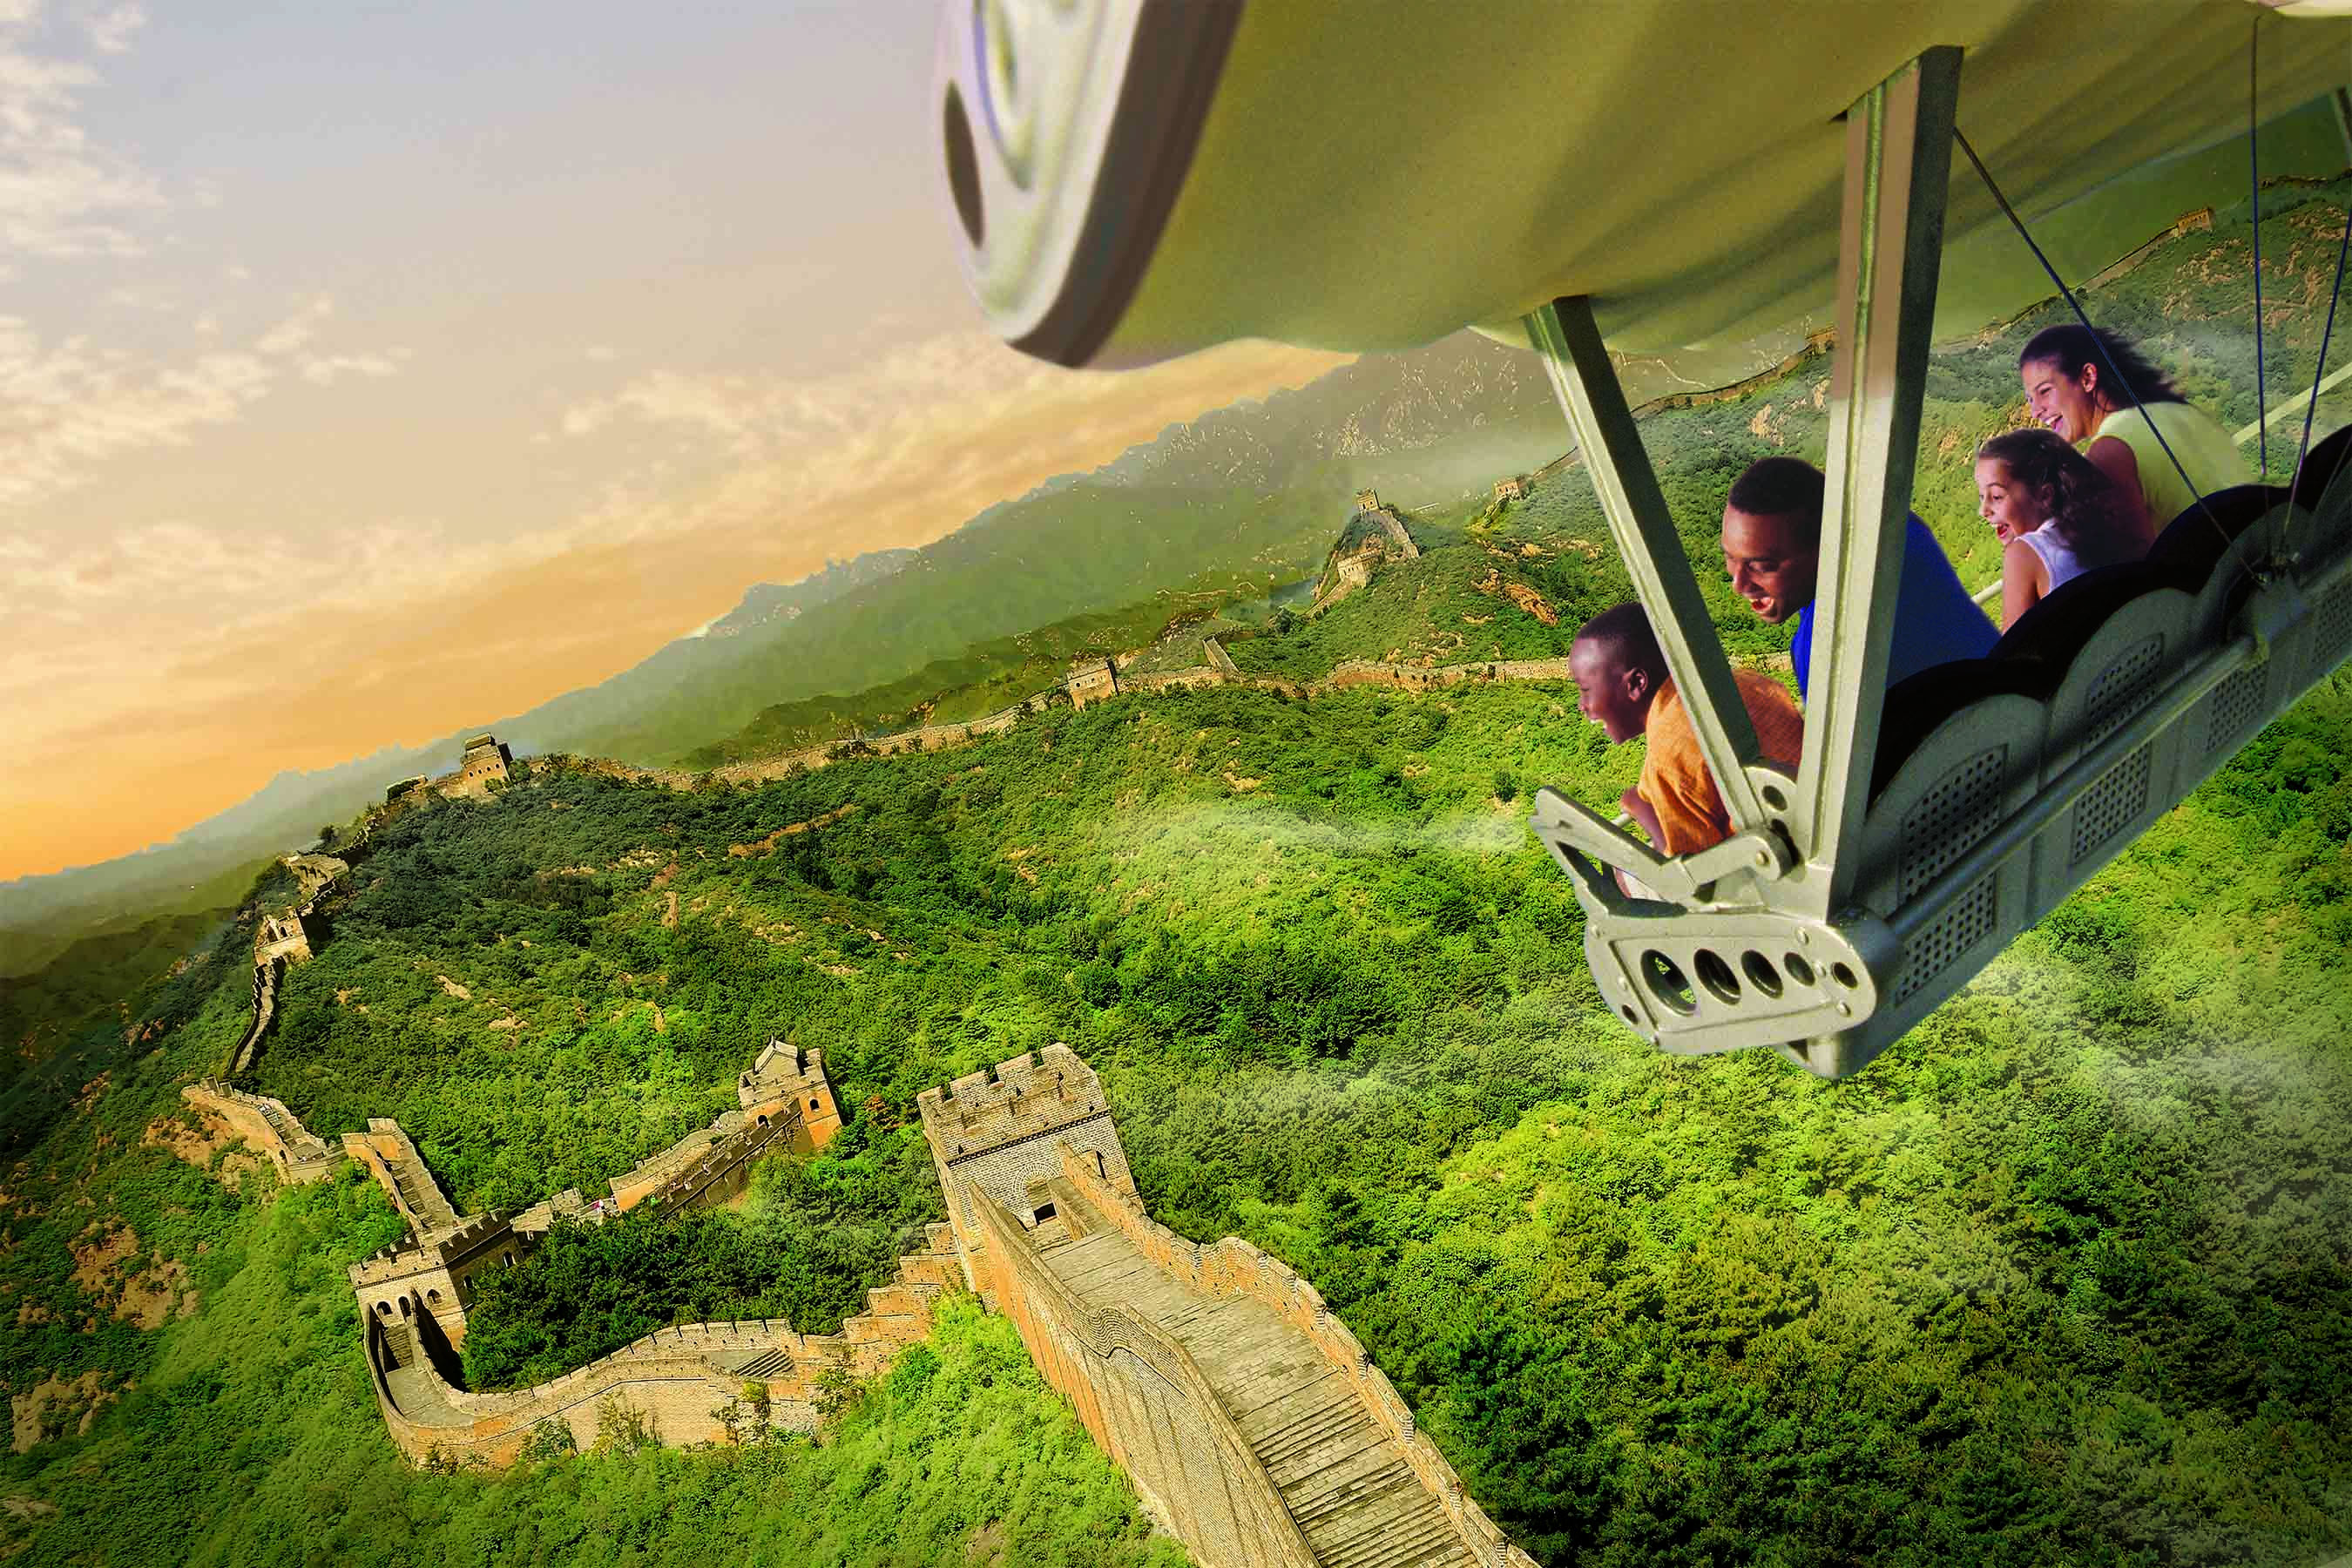 Soarin’ Around the World Takes Flight This Summer at Epcot